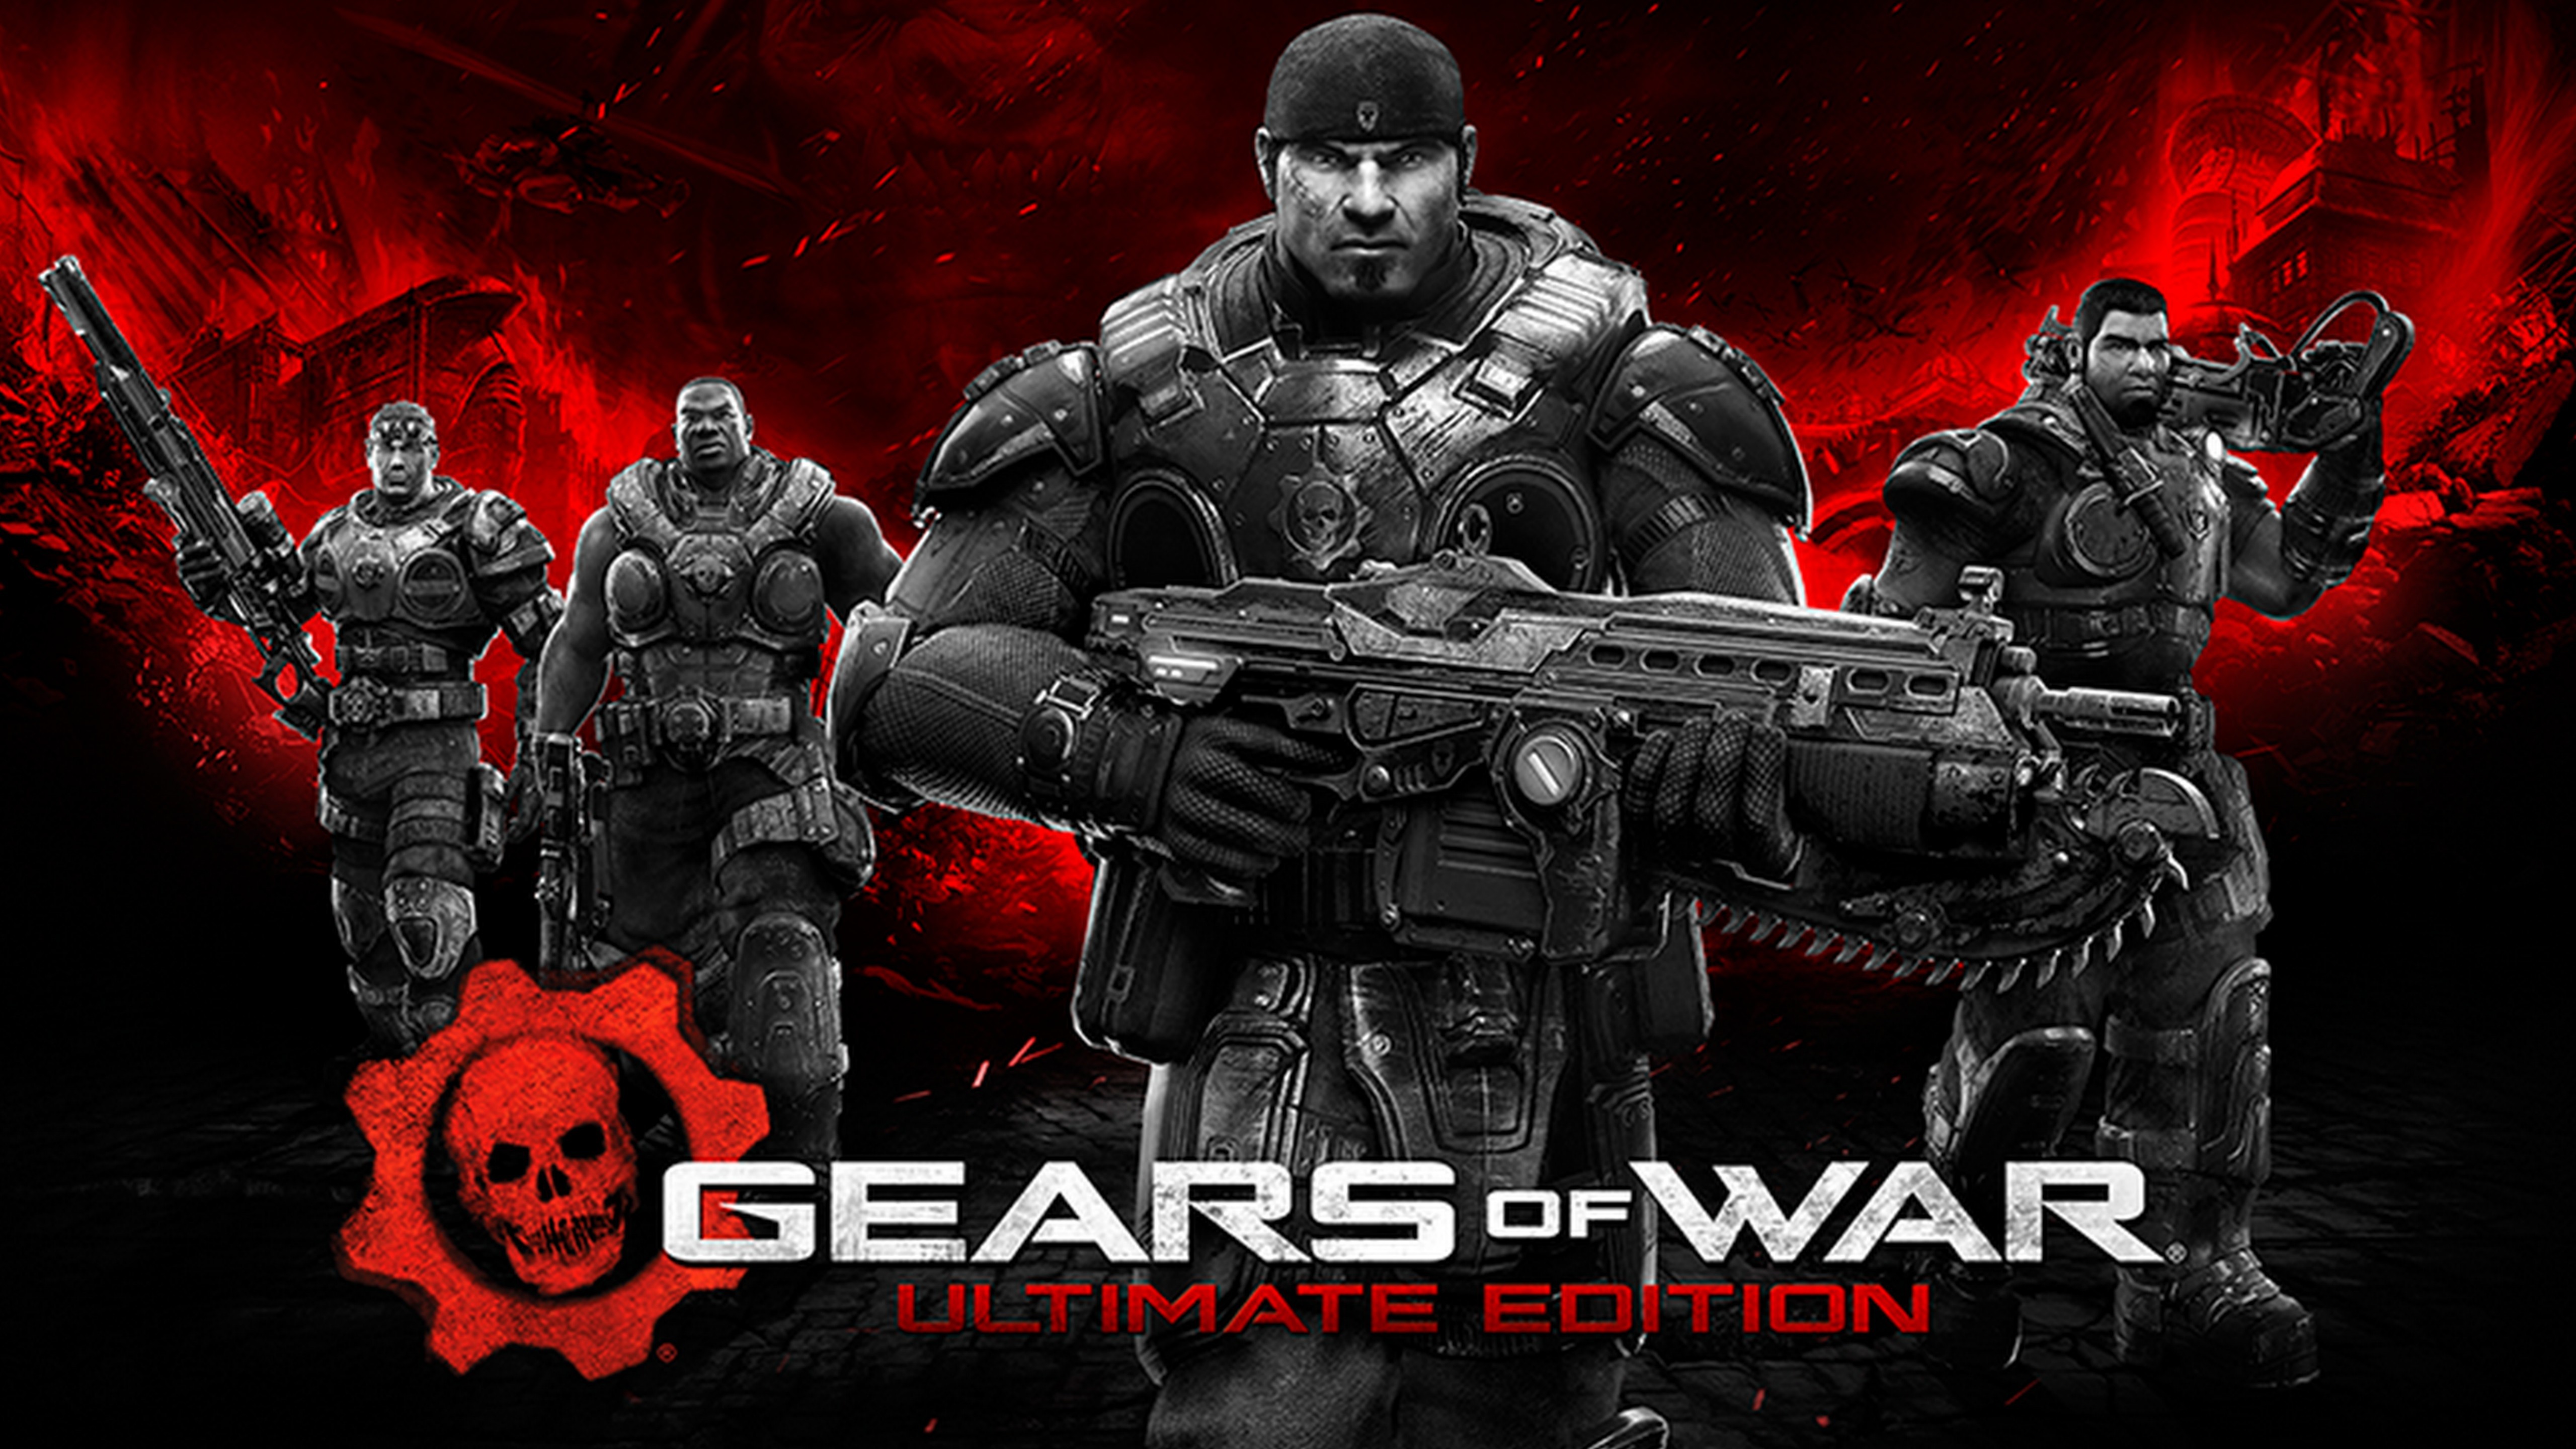 Gears of War: Ultimate Edition for Windows 10 – Available in the Windows Store starting today